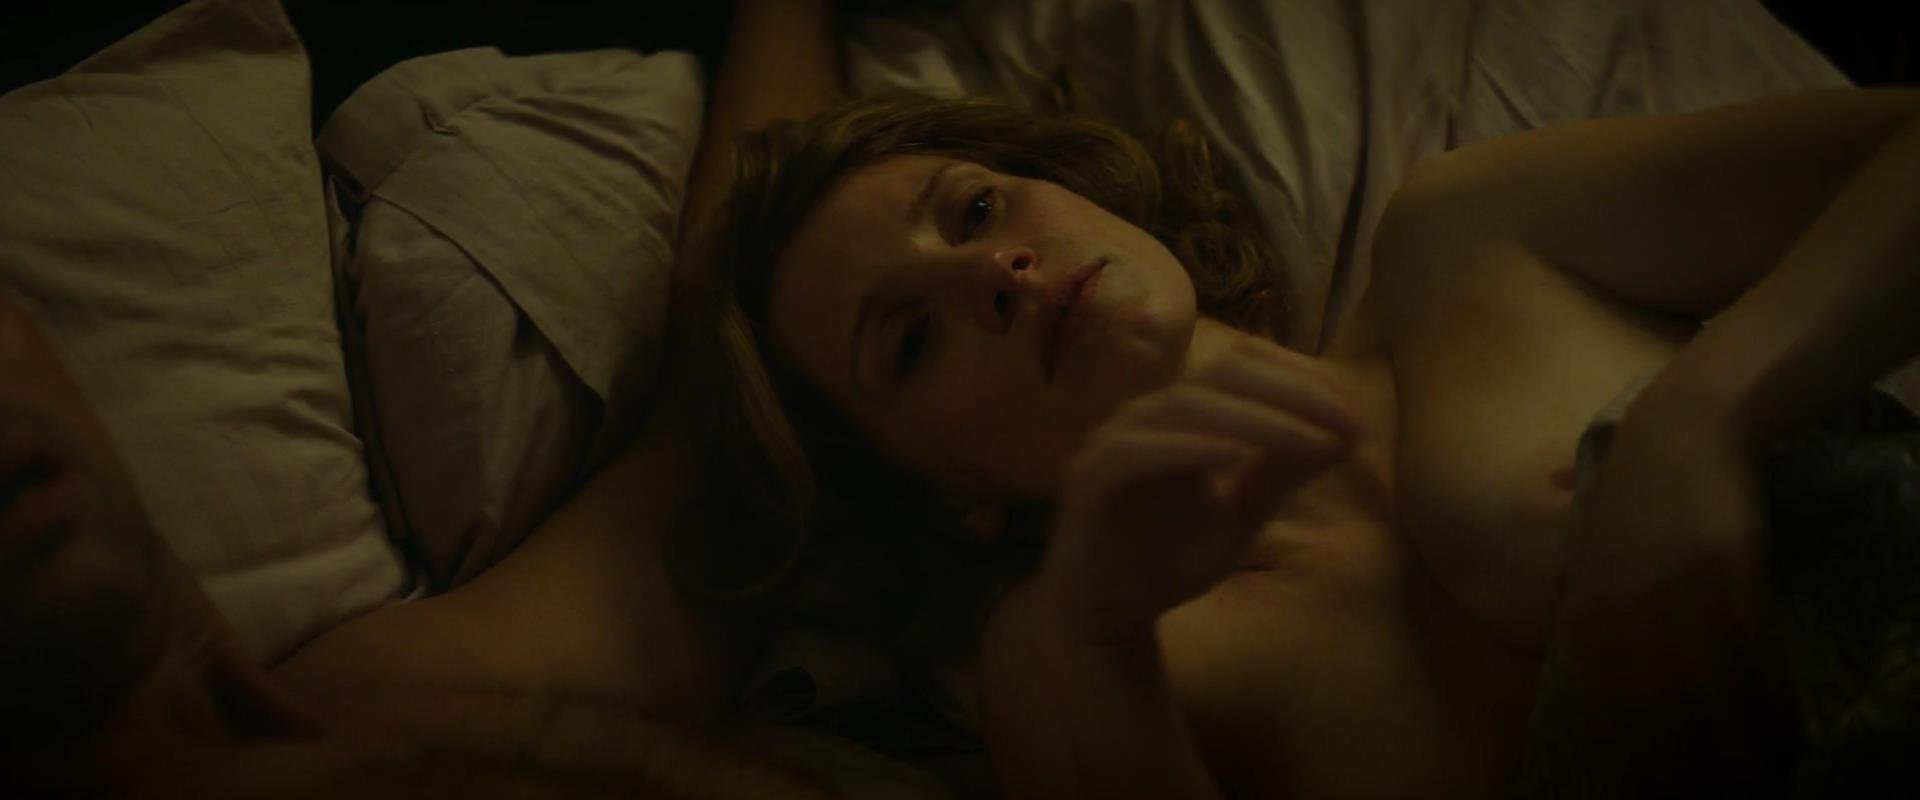 Jessica Chastain Nude - The Zookeeper’s Wife (2017) 1080p